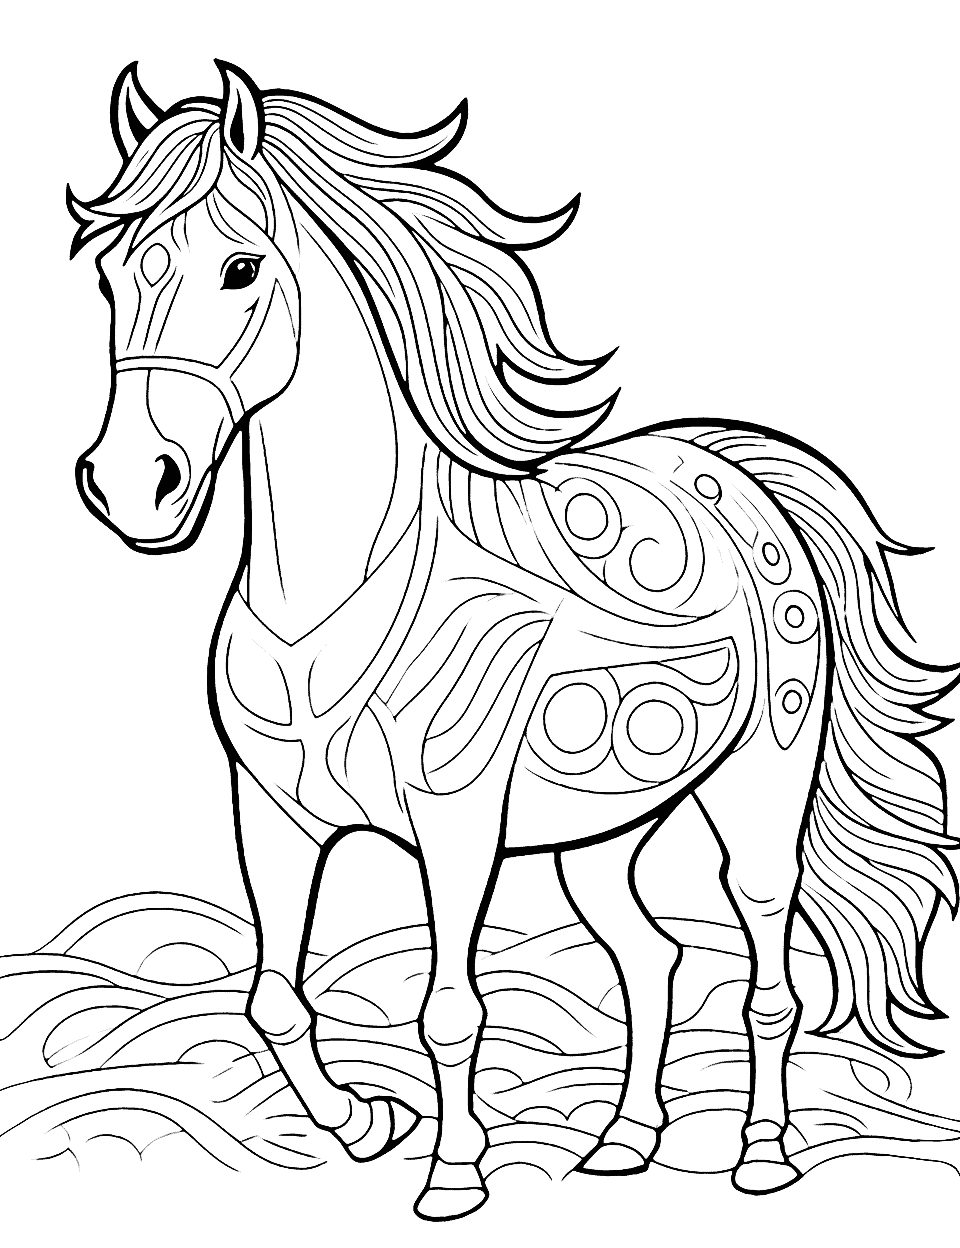 Detailed Mandala Horse Animal Coloring Page - A horse-shaped mandala design with intricate patterns to color.